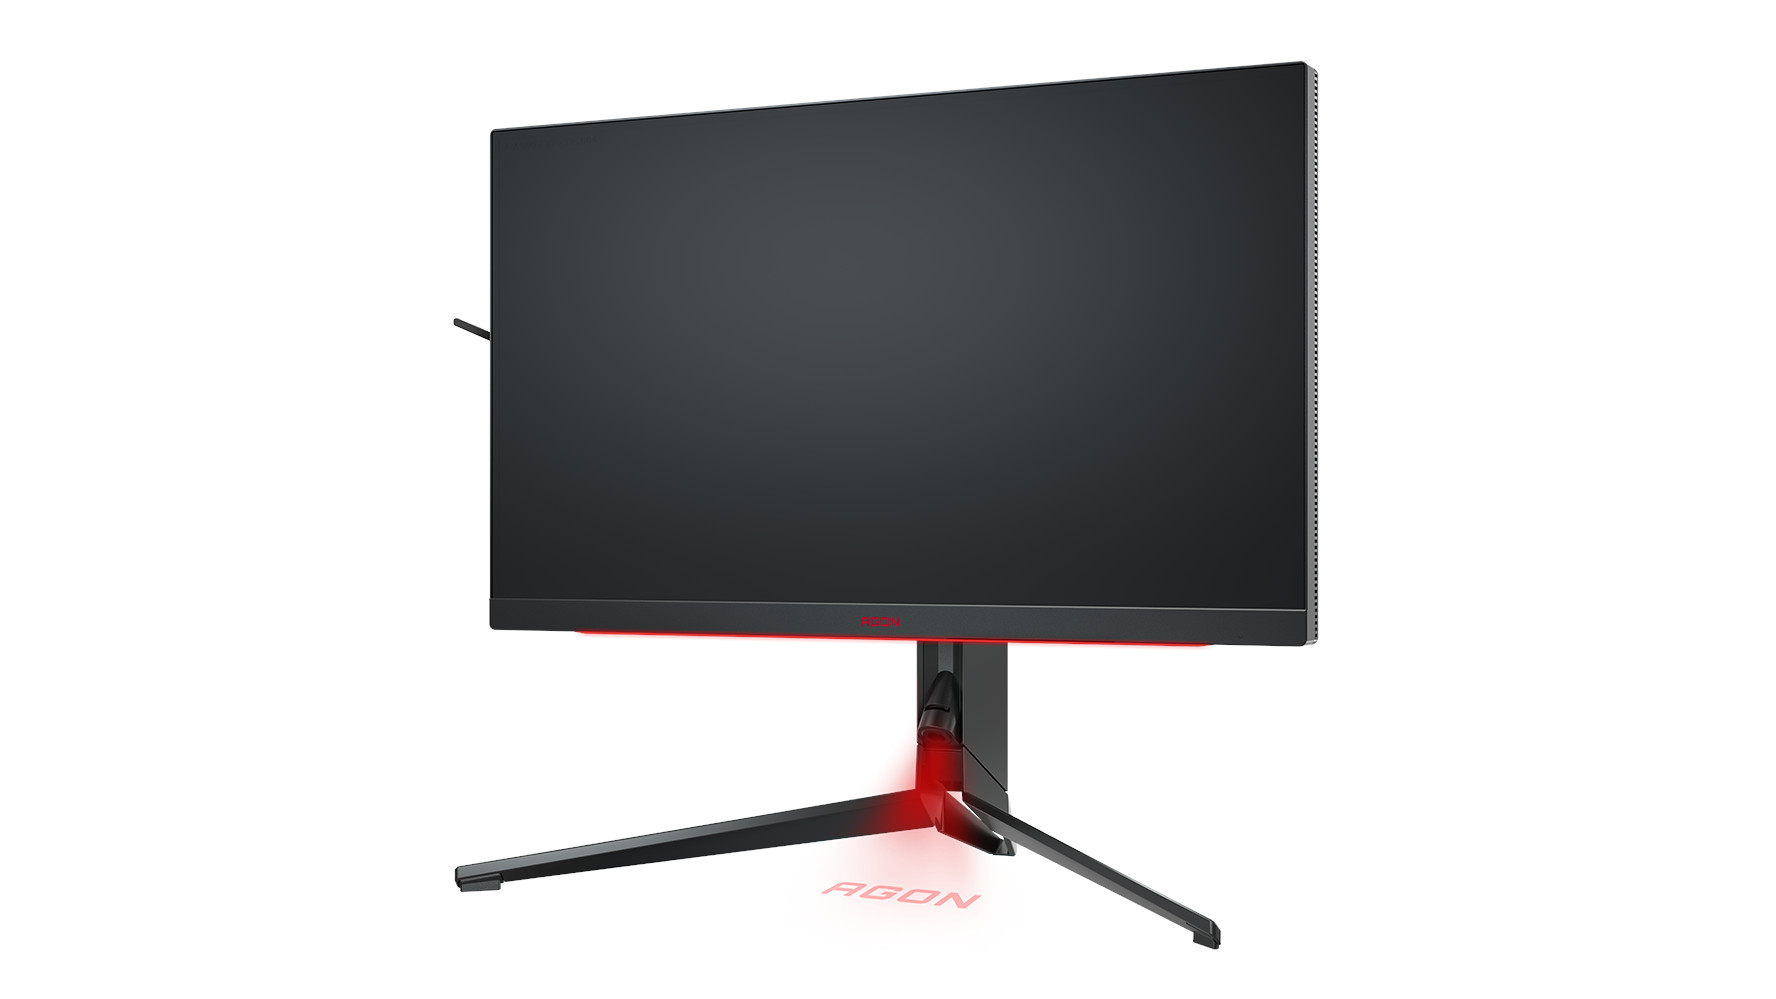 Aoc 27 Inch Mini Led Monitor Delivers Esports Tuned 1440p Images At Ultra Fast Frame Rates